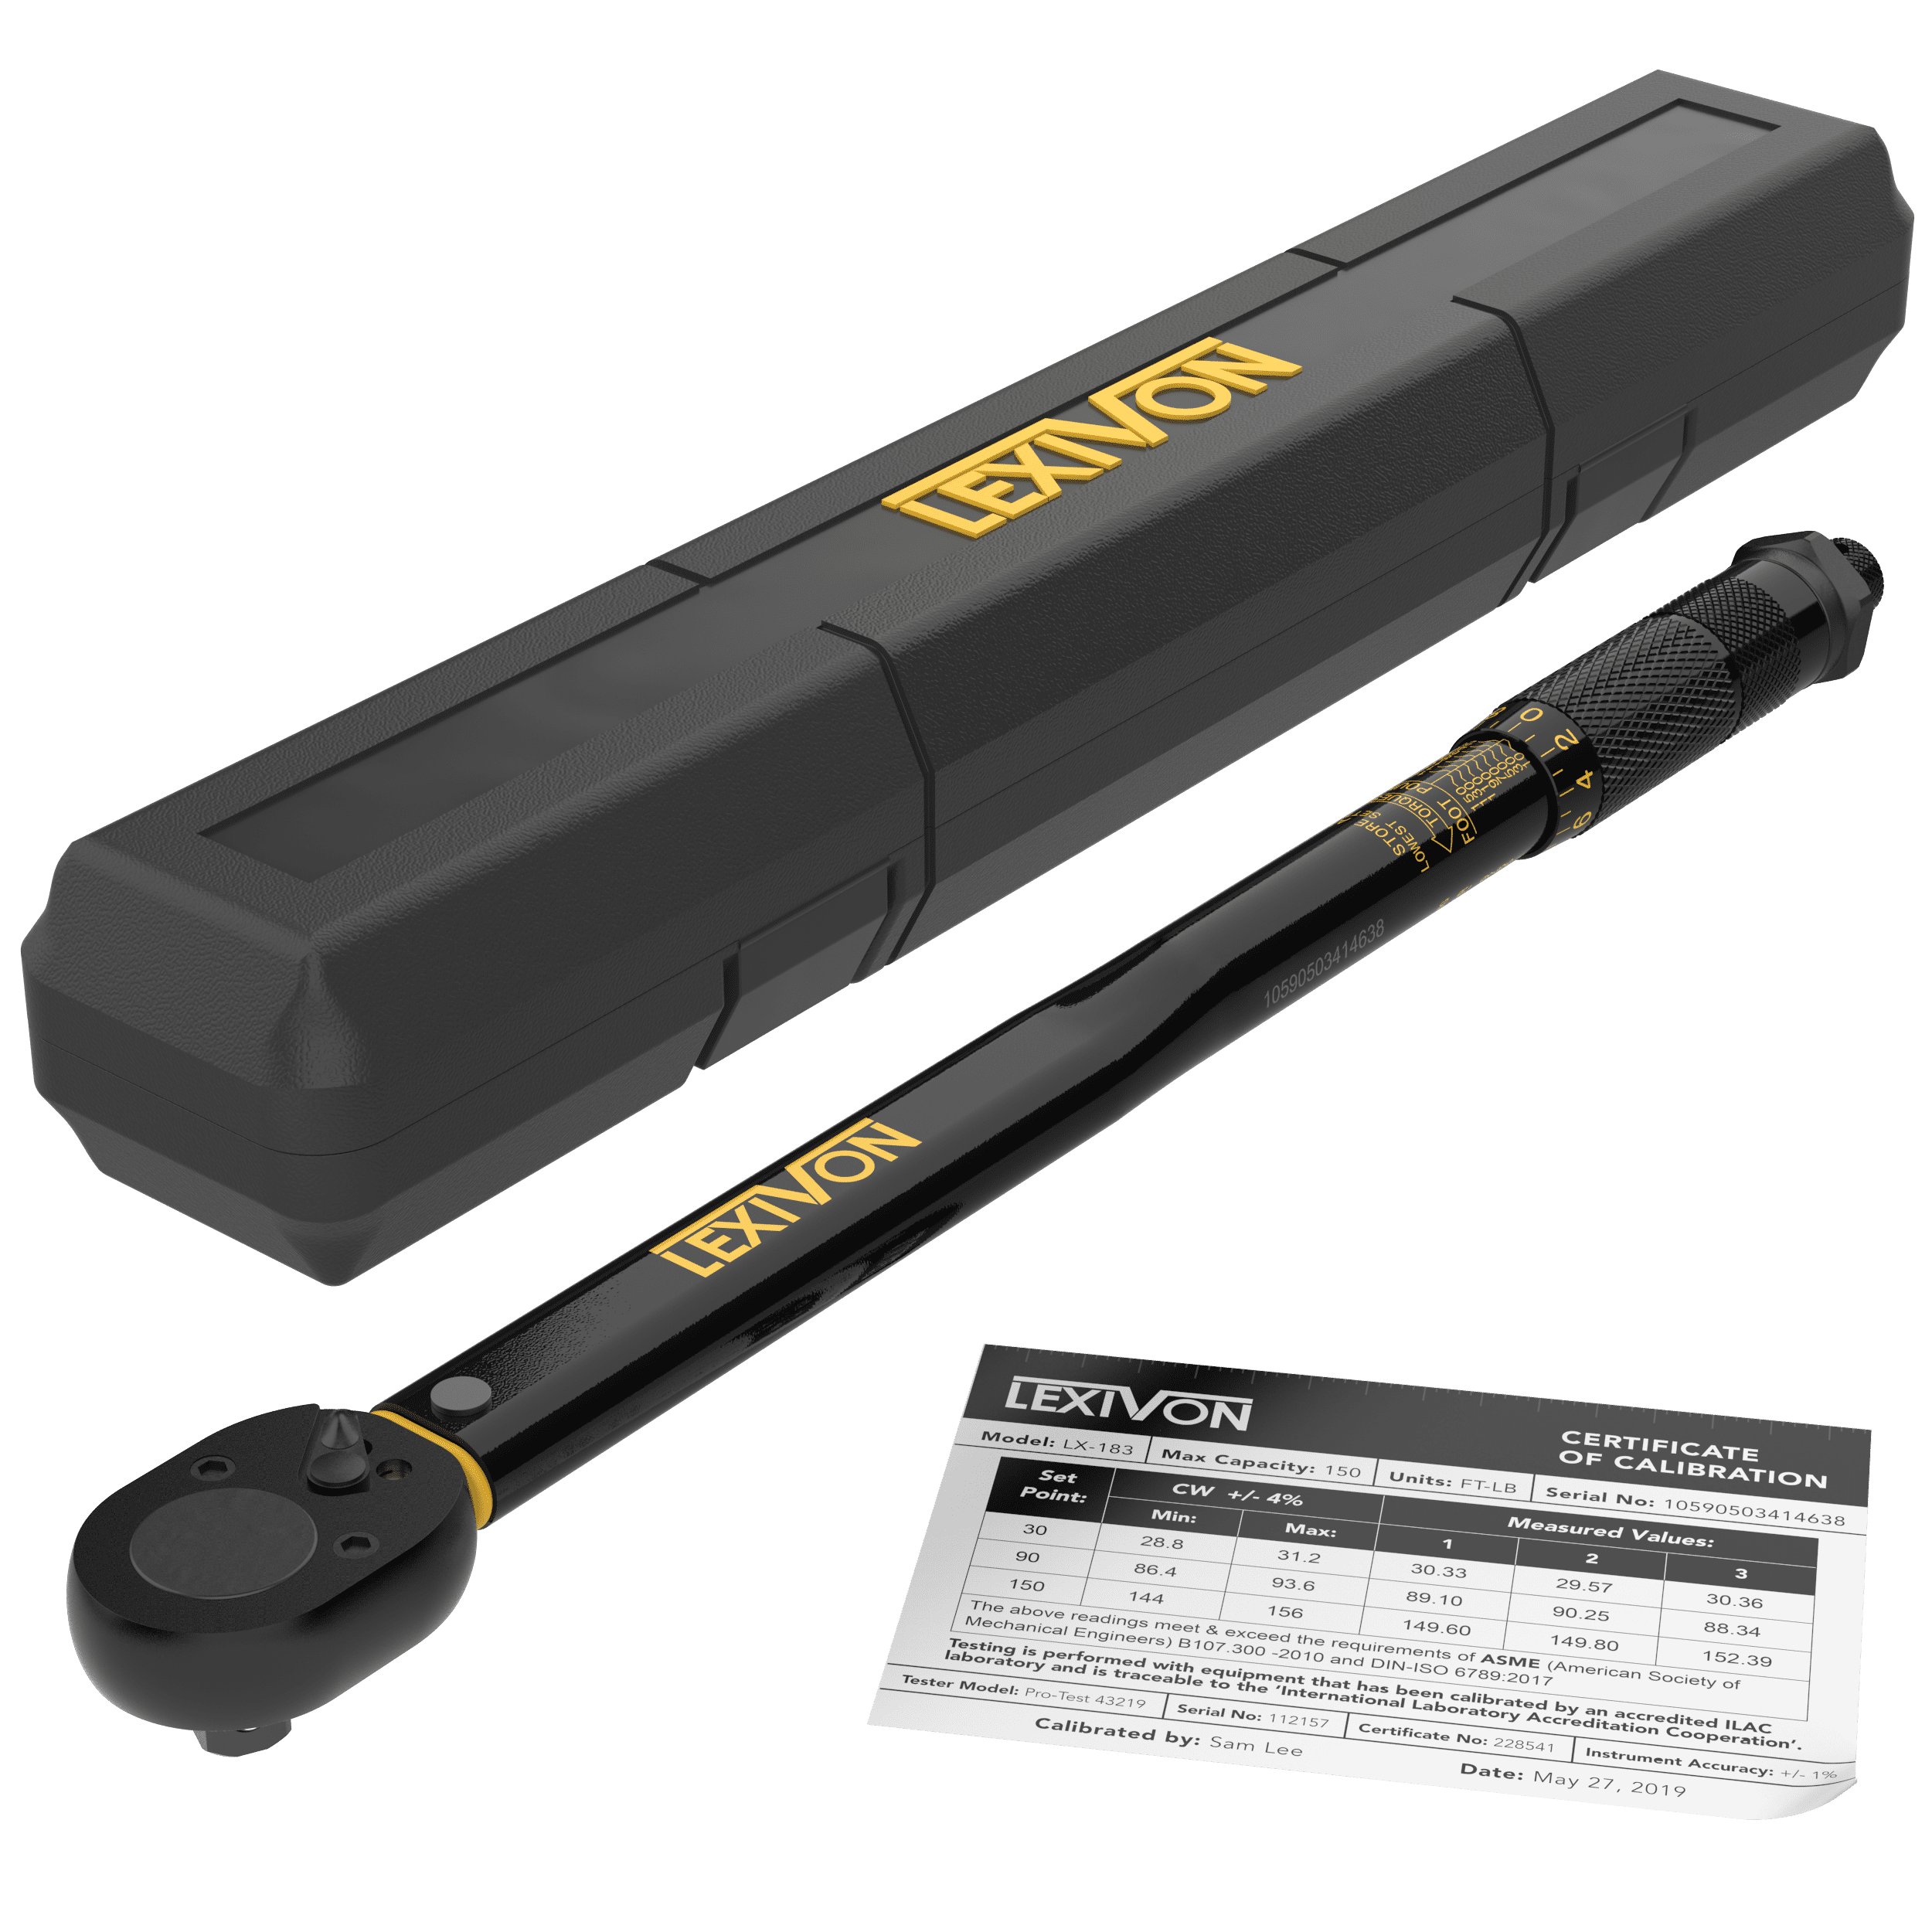 Lexivon Inch Pound Torque Wrench 1/4-Inch Drive 20-200 in-lb/2.26-22.6 Nm  (LX-181)